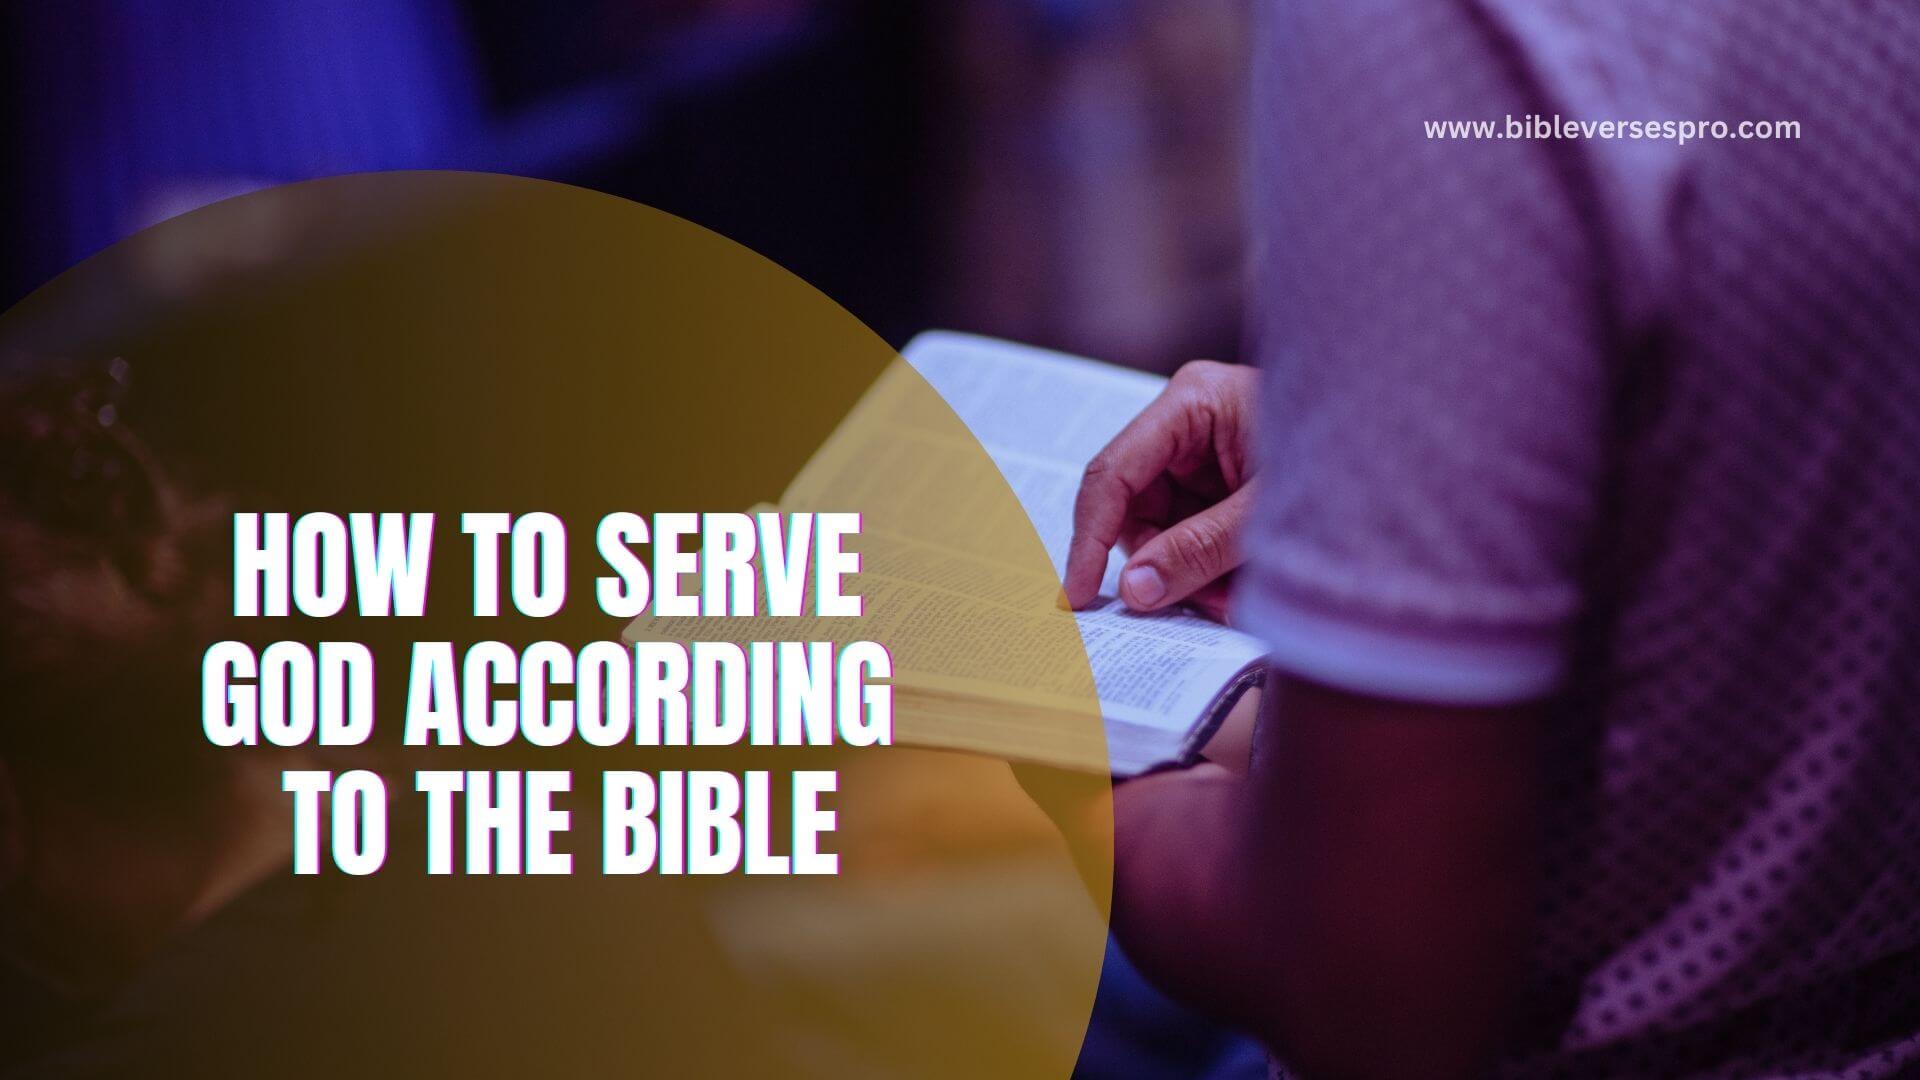 How To Serve God According To The Bible (1)